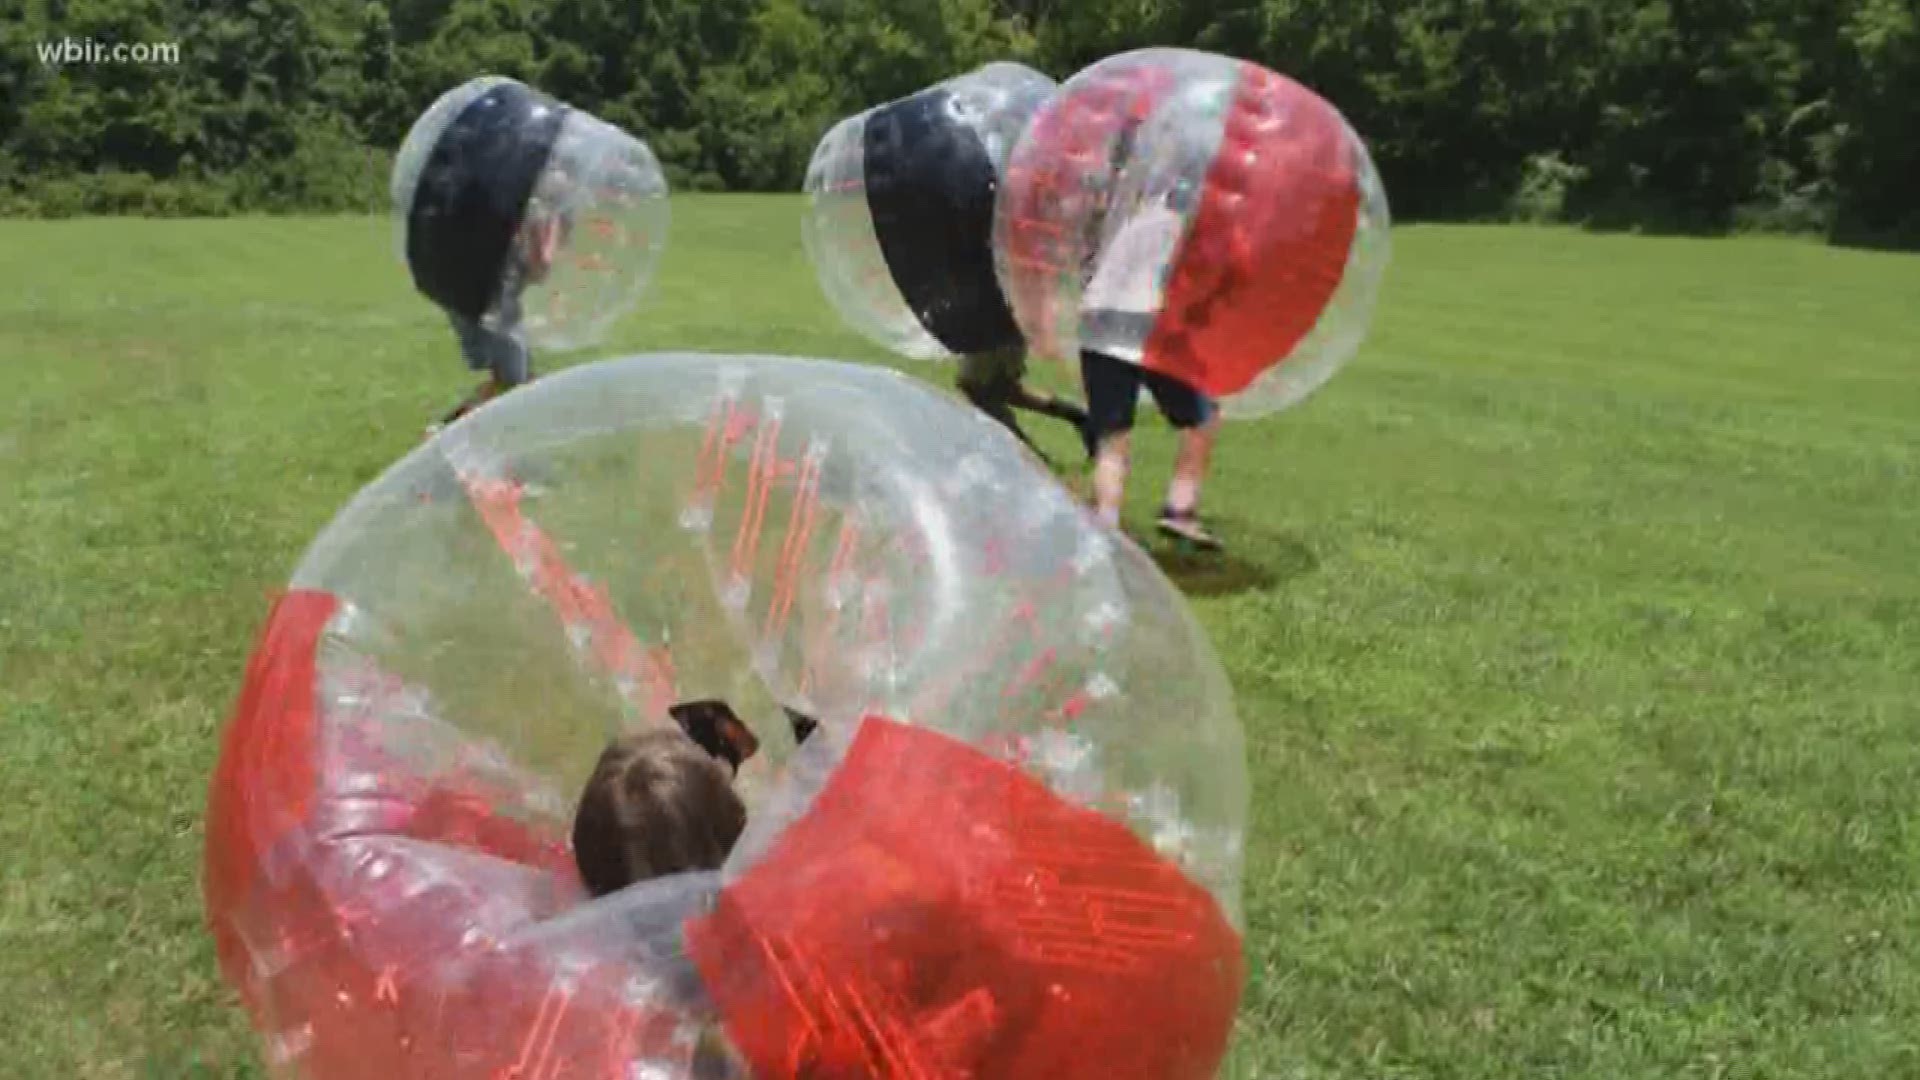 Basketball season is over, football is still more than a month away... so why not try out the new sport of 'knockerball.'